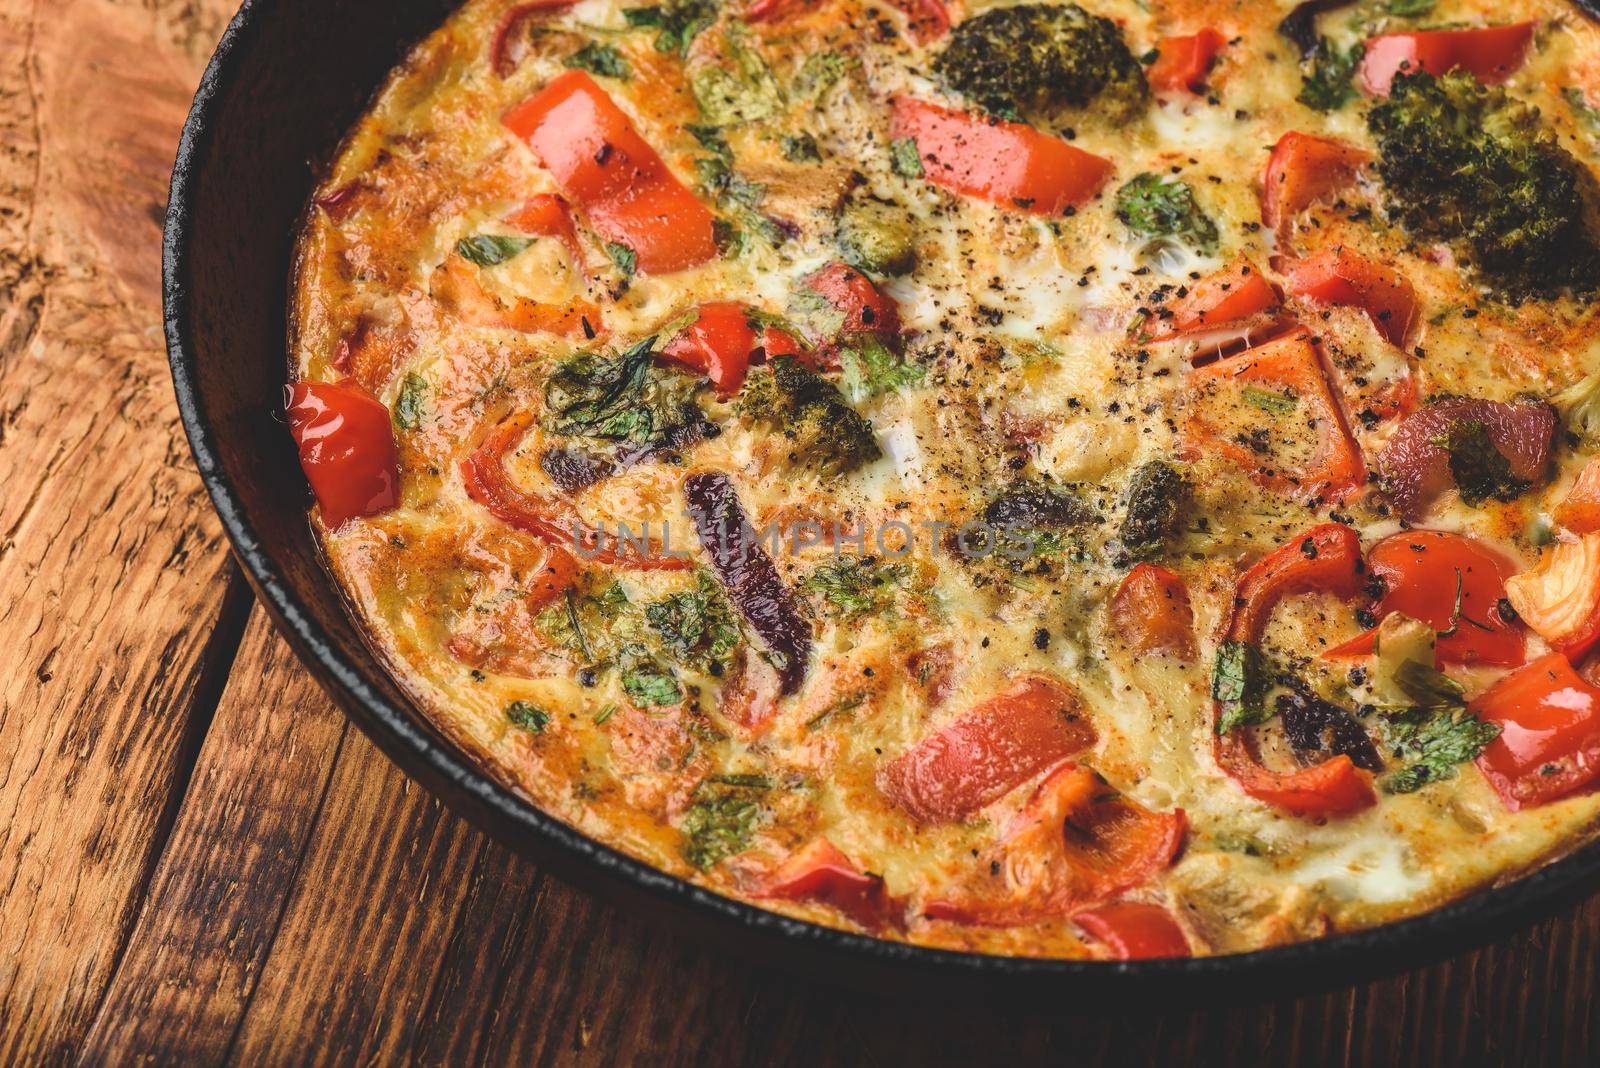 Vegetable frittata with broccoli and red pepper by Seva_blsv